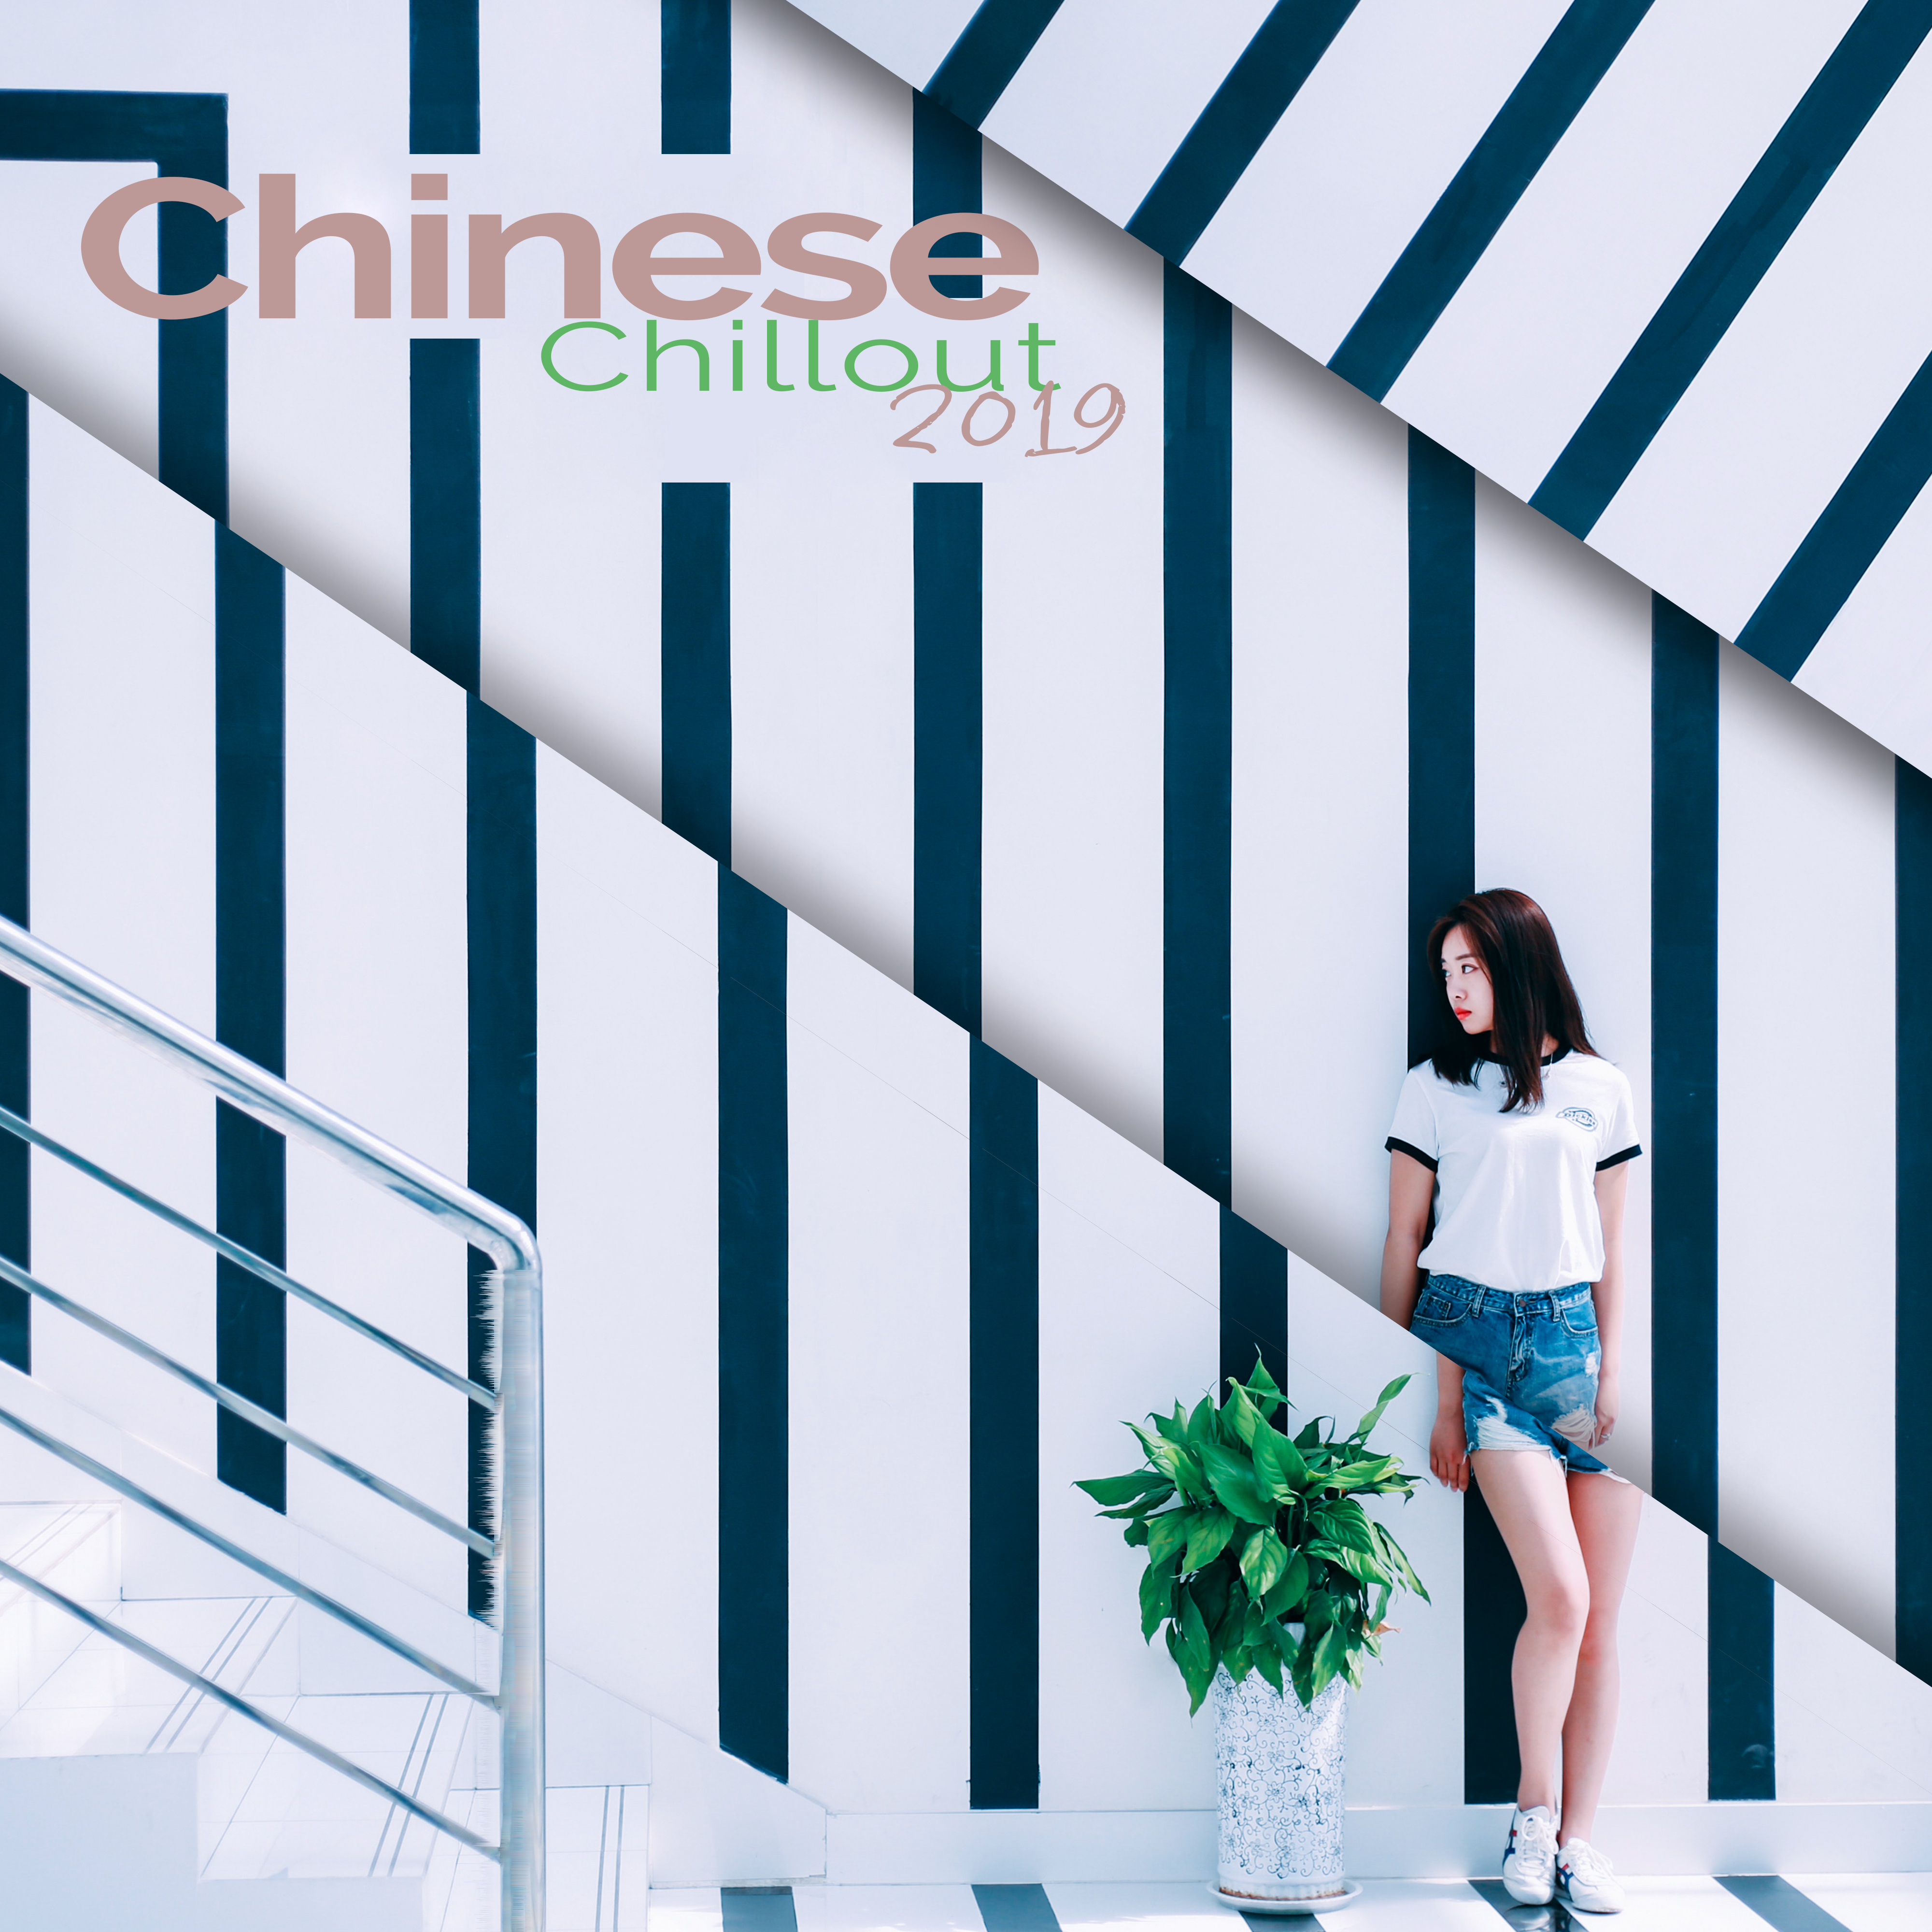 Chinese Chillout 2019